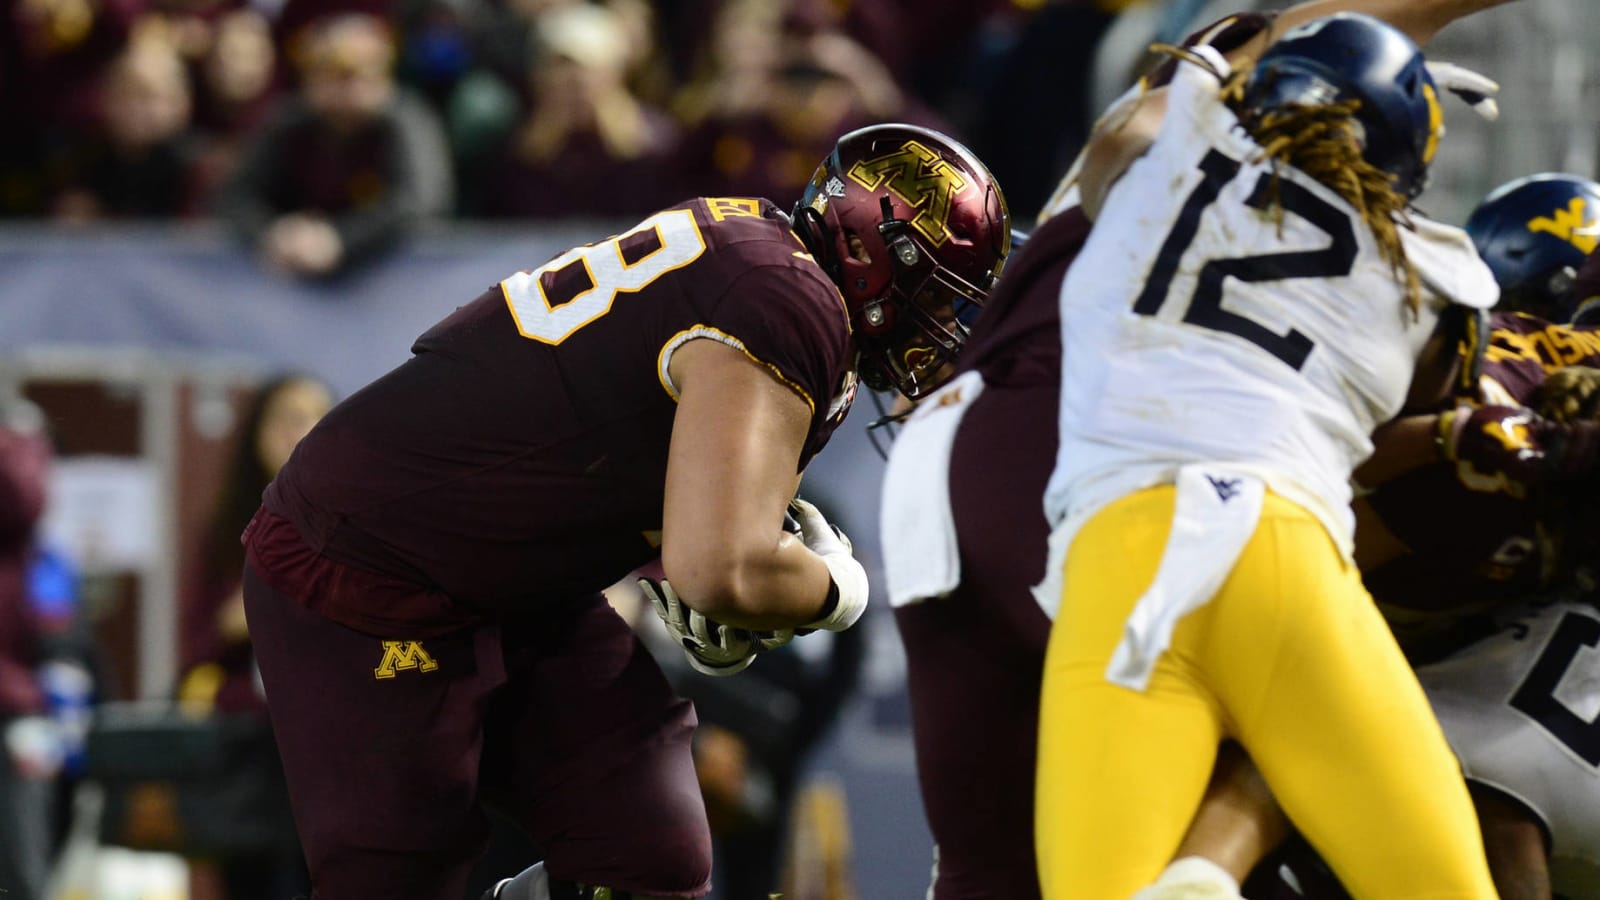 Minnesota uses massive lineman to score awesome touchdown